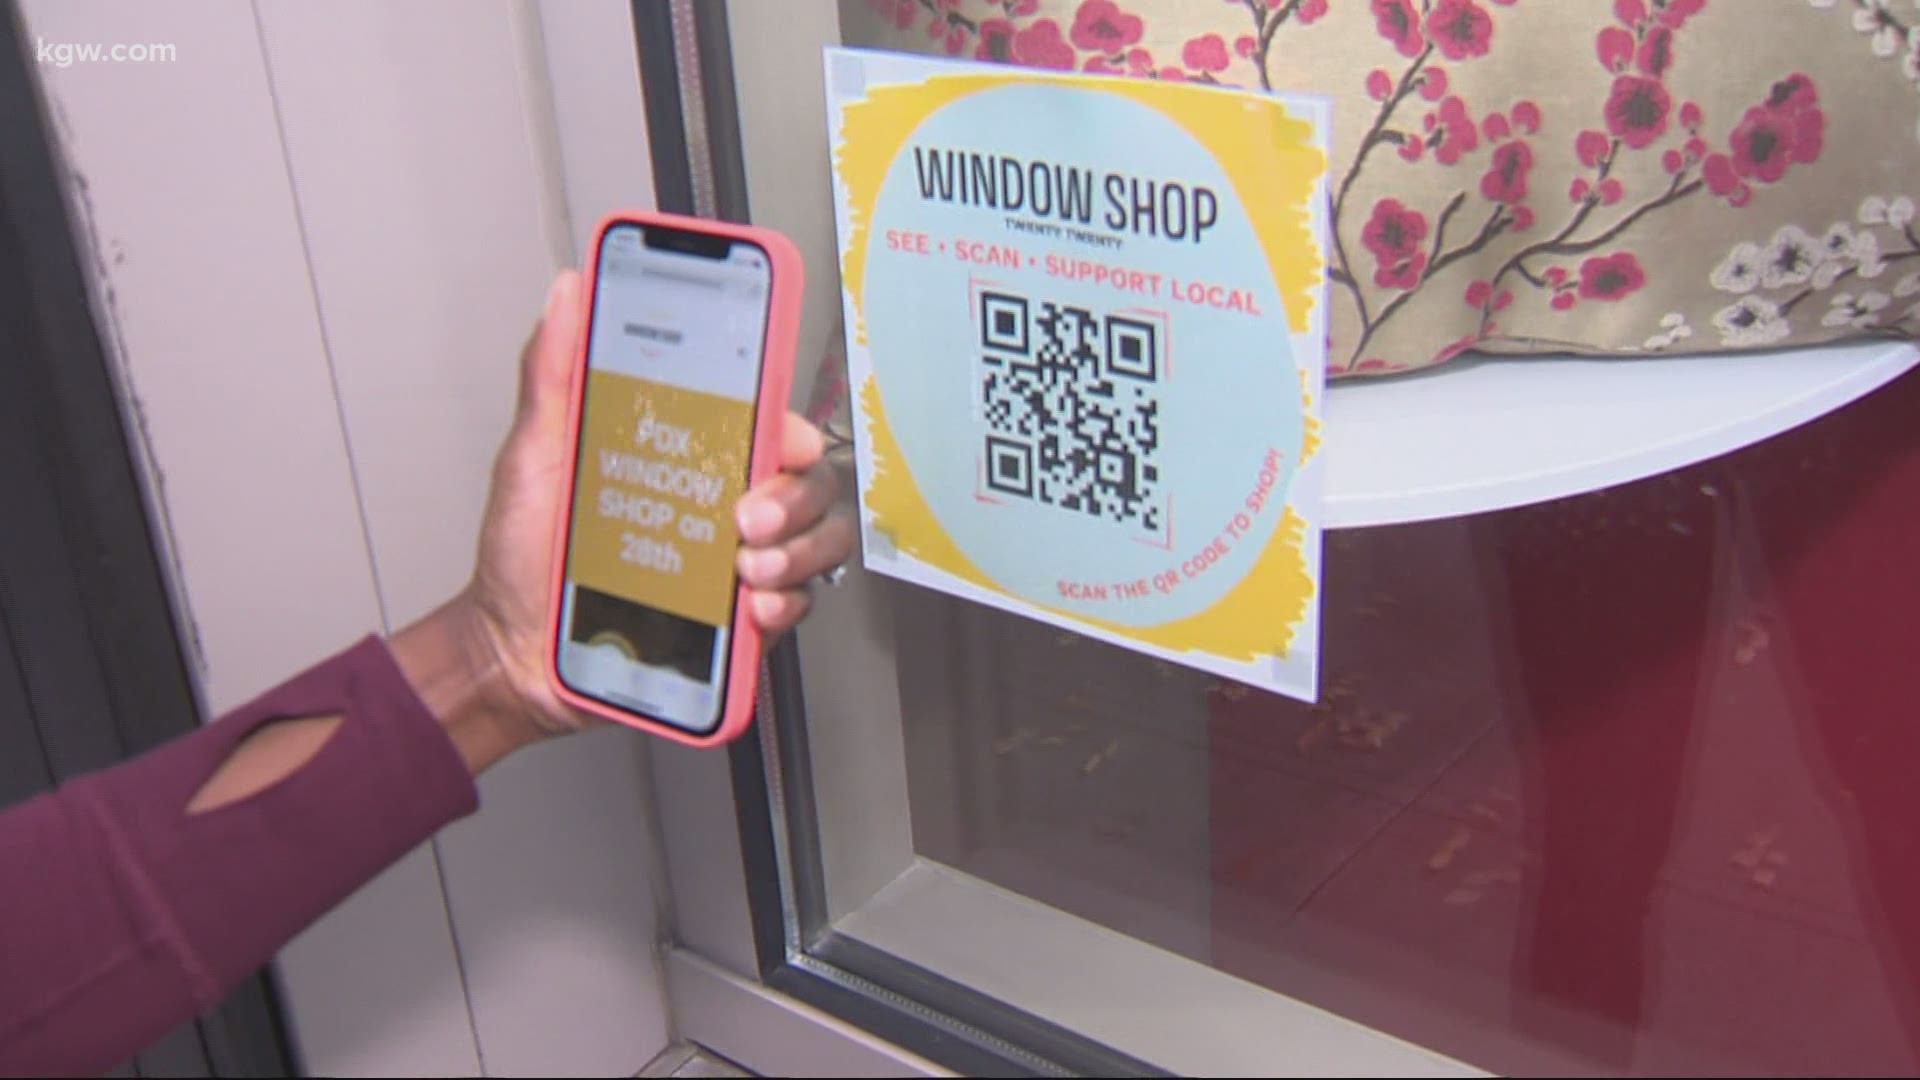 With many Portland shops struggling during the pandemic, one small business owner came up with a new take on "window shopping" to allow for quick, no-contact sales.